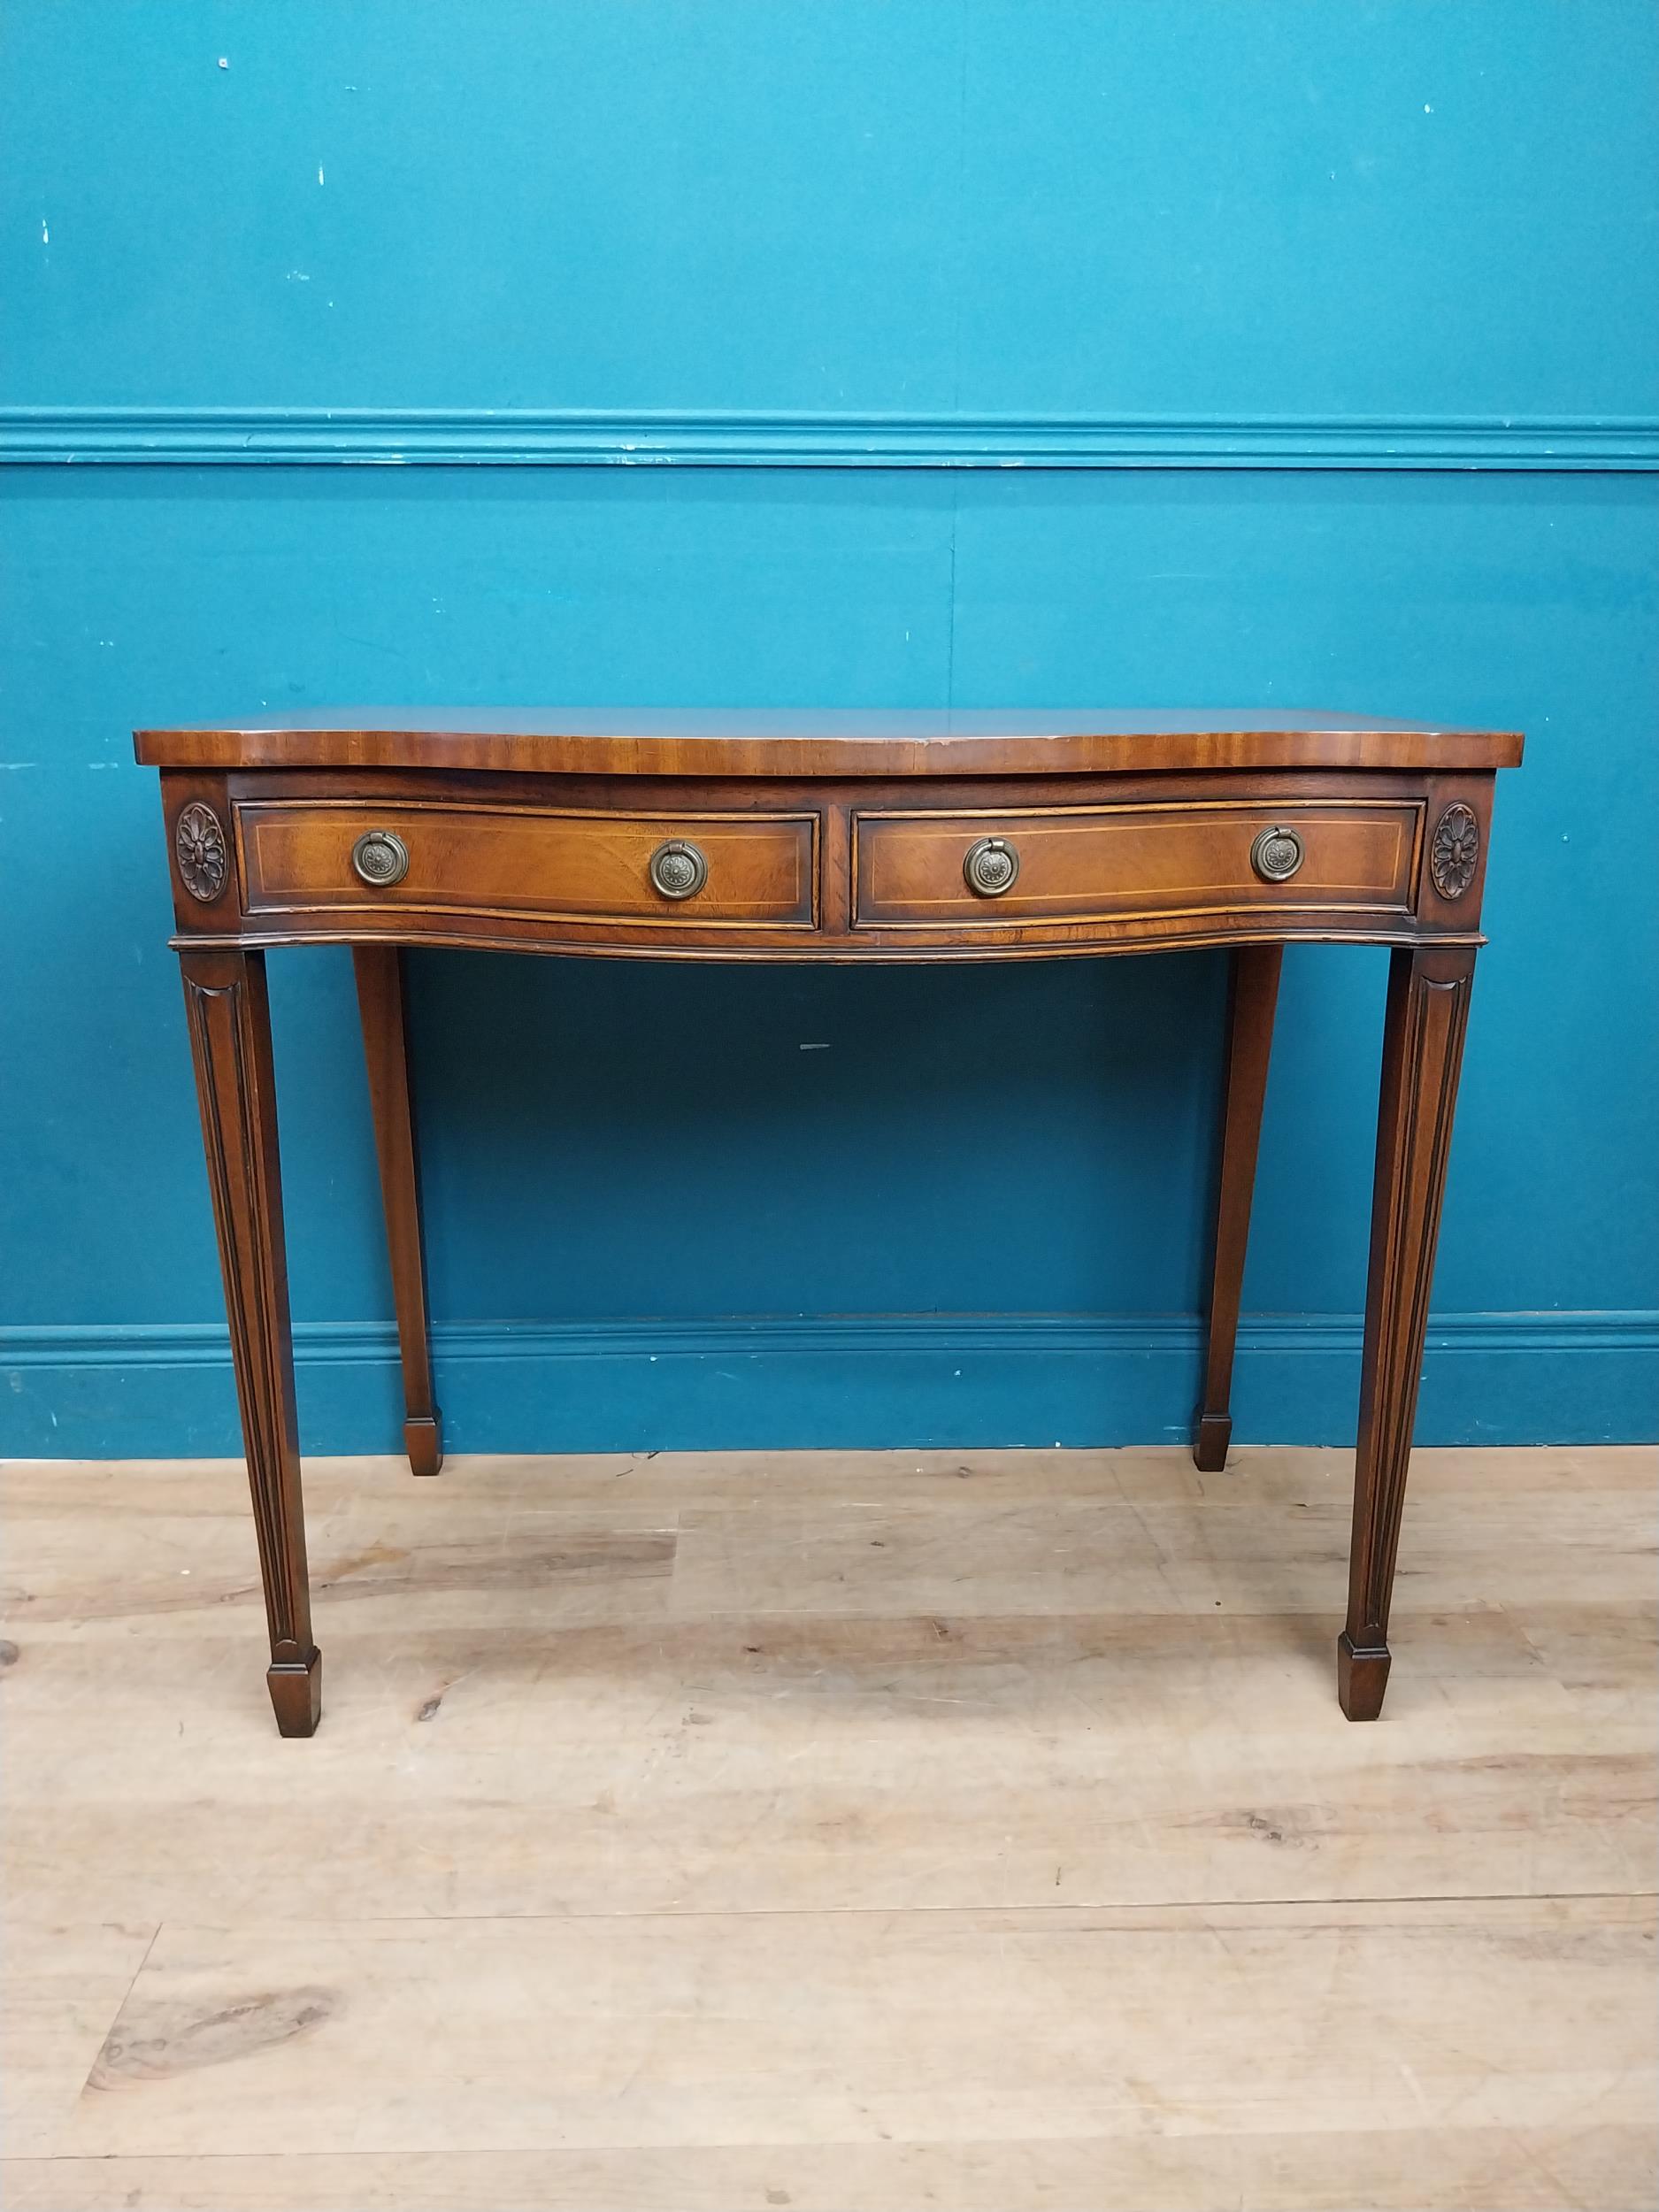 Mahogany and satinwood side table with serpentine front and two drawers in frieze raised on